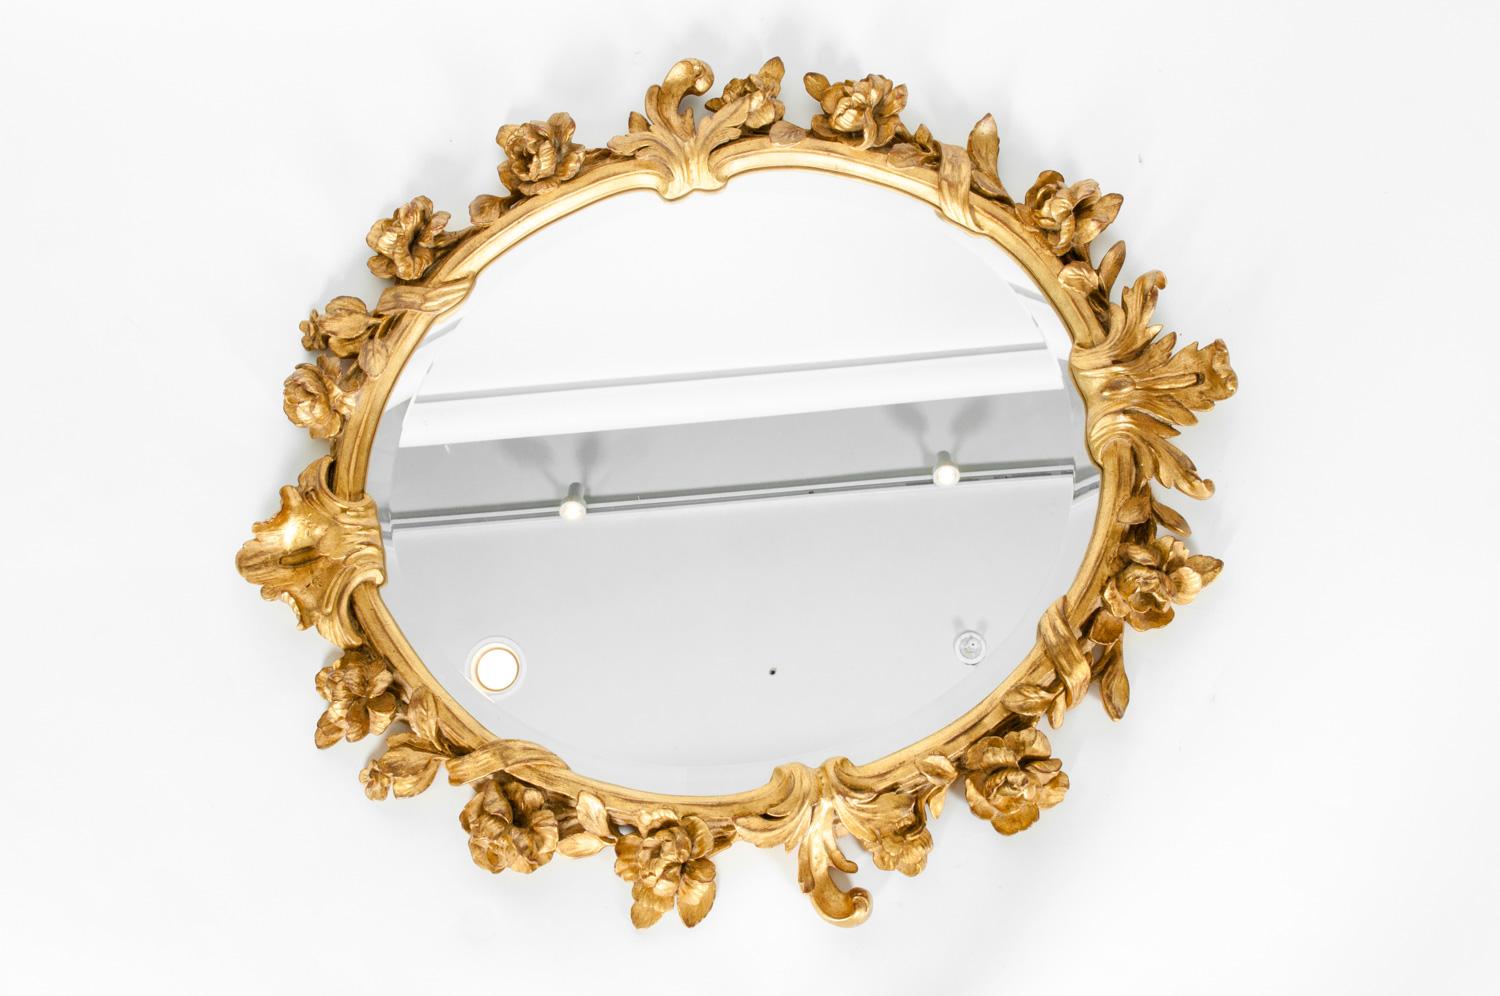 Mid-20th century giltwood framed round wreath bevelled hanging mirror. The mirror is in excellent condition . The mirror measure about 29 inches long x 26 inches width.